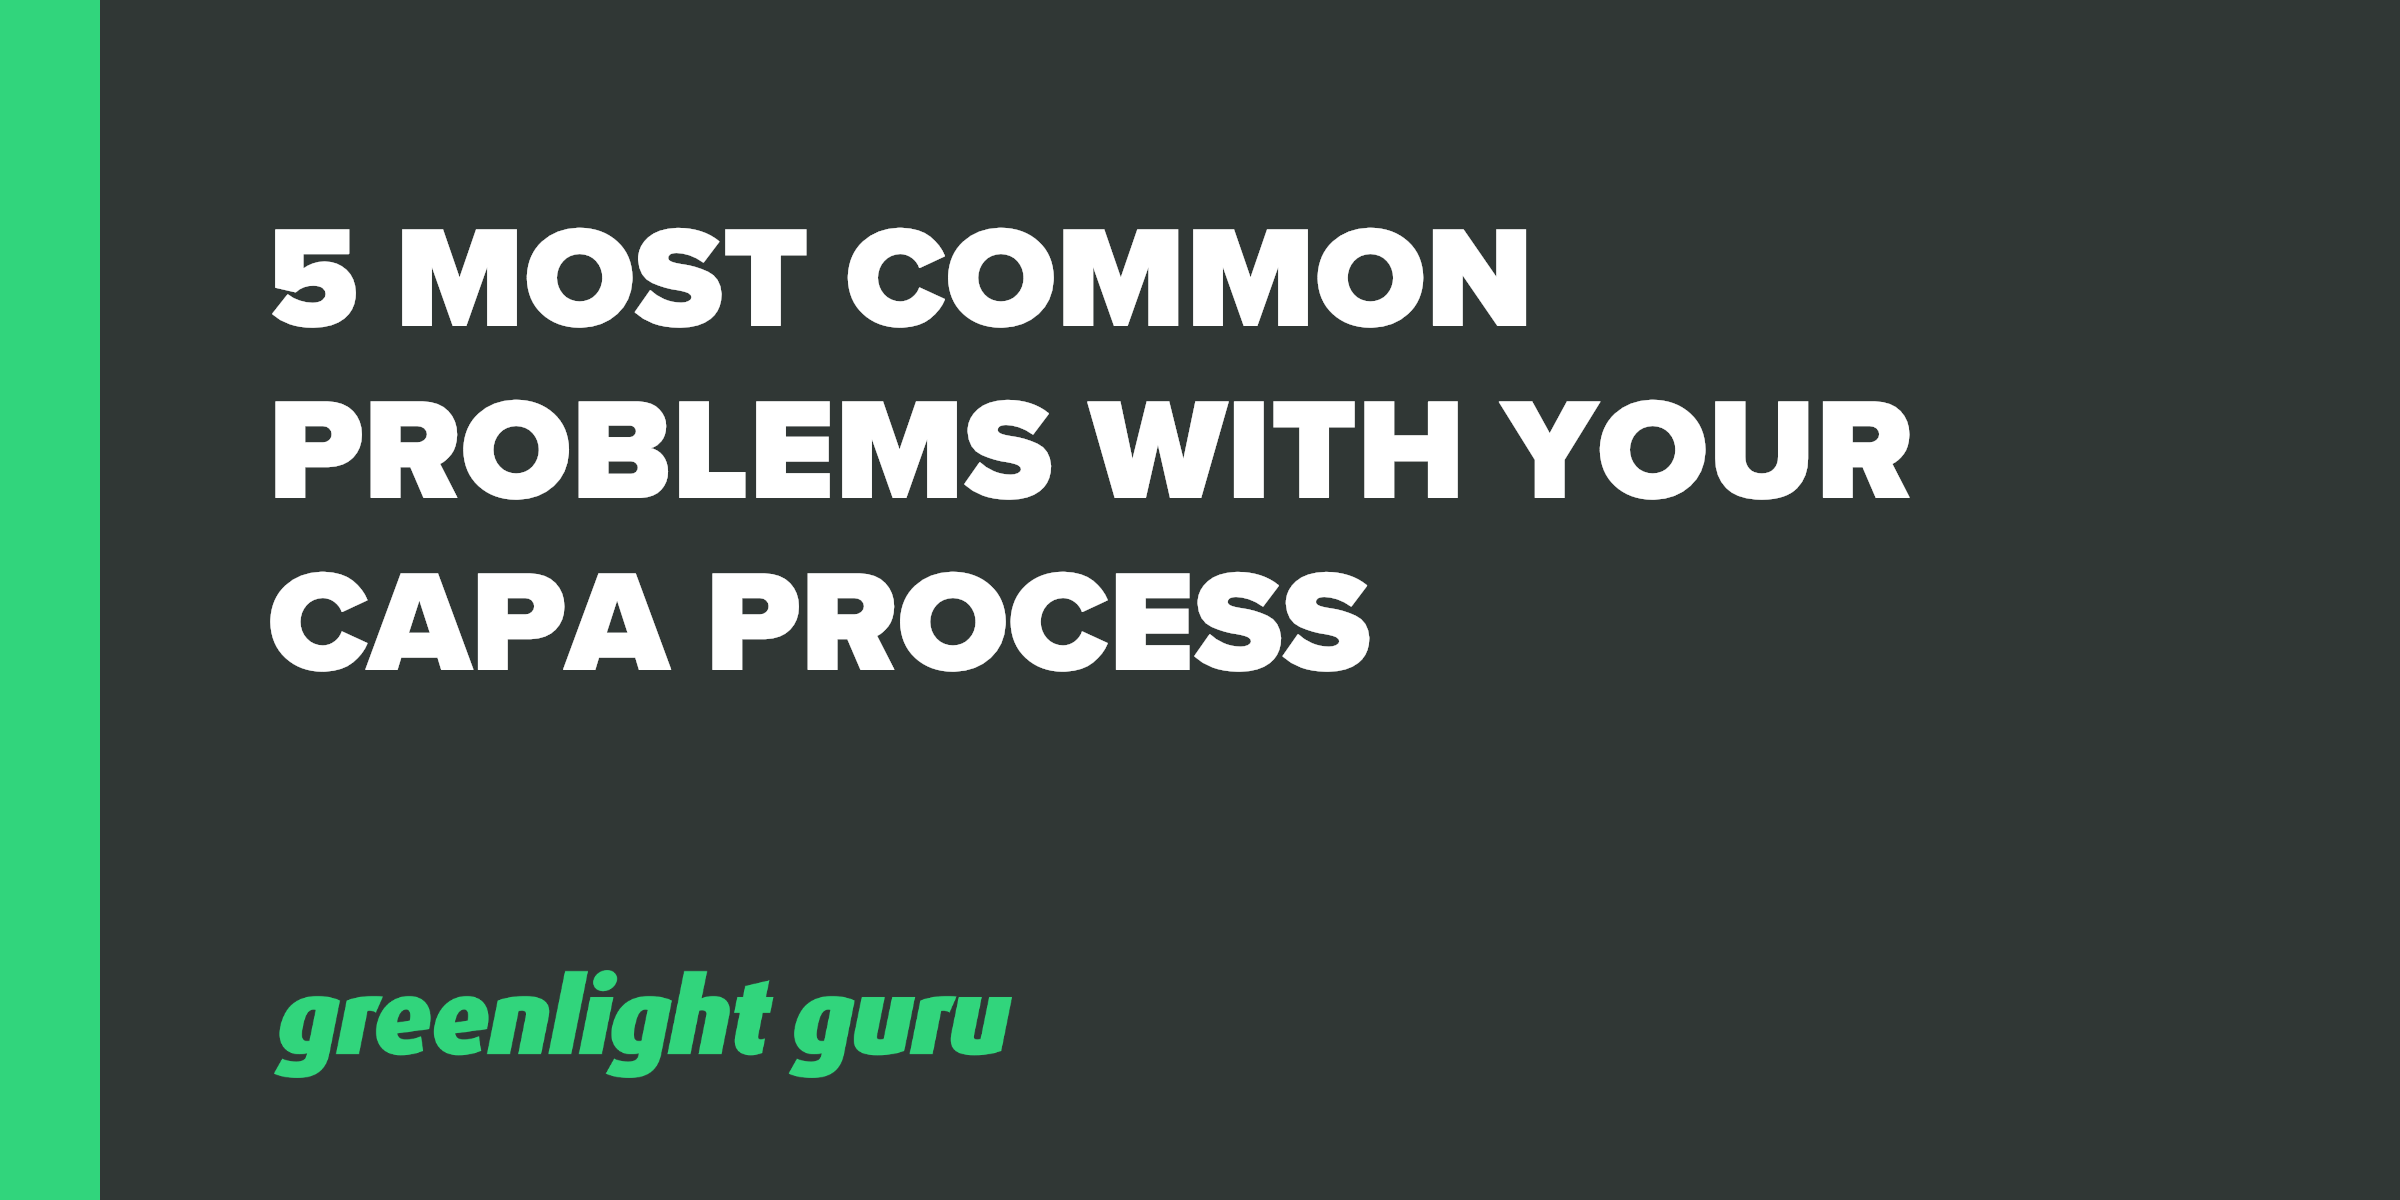 5 Most Common Problems with your CAPA Process